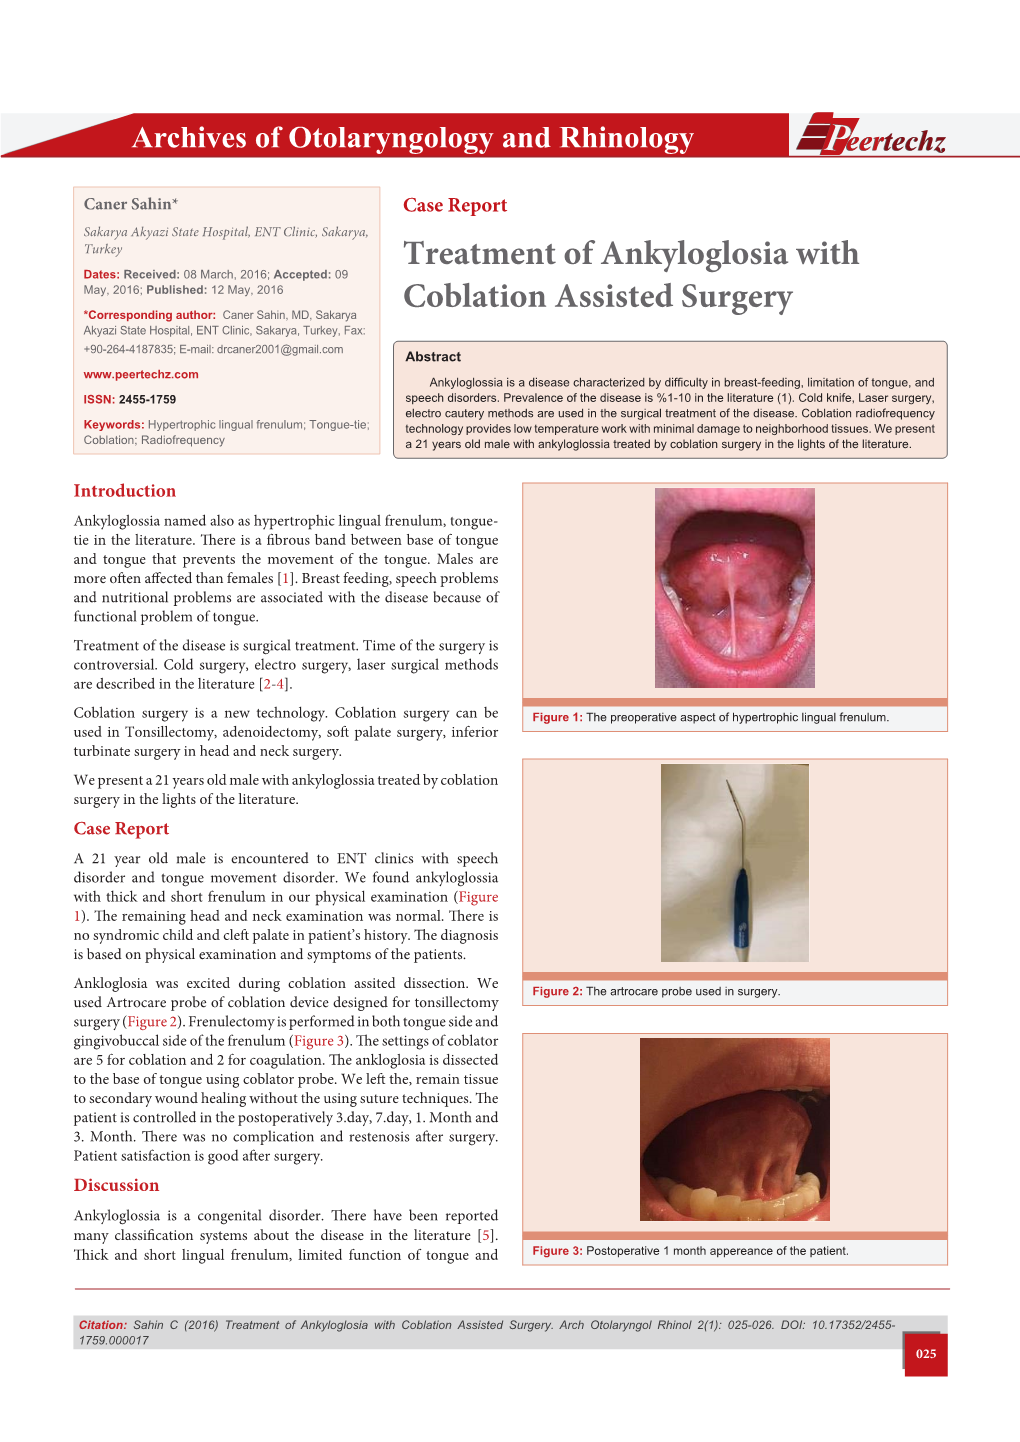 Treatment of Ankyloglosia with Coblation Assisted Surgery